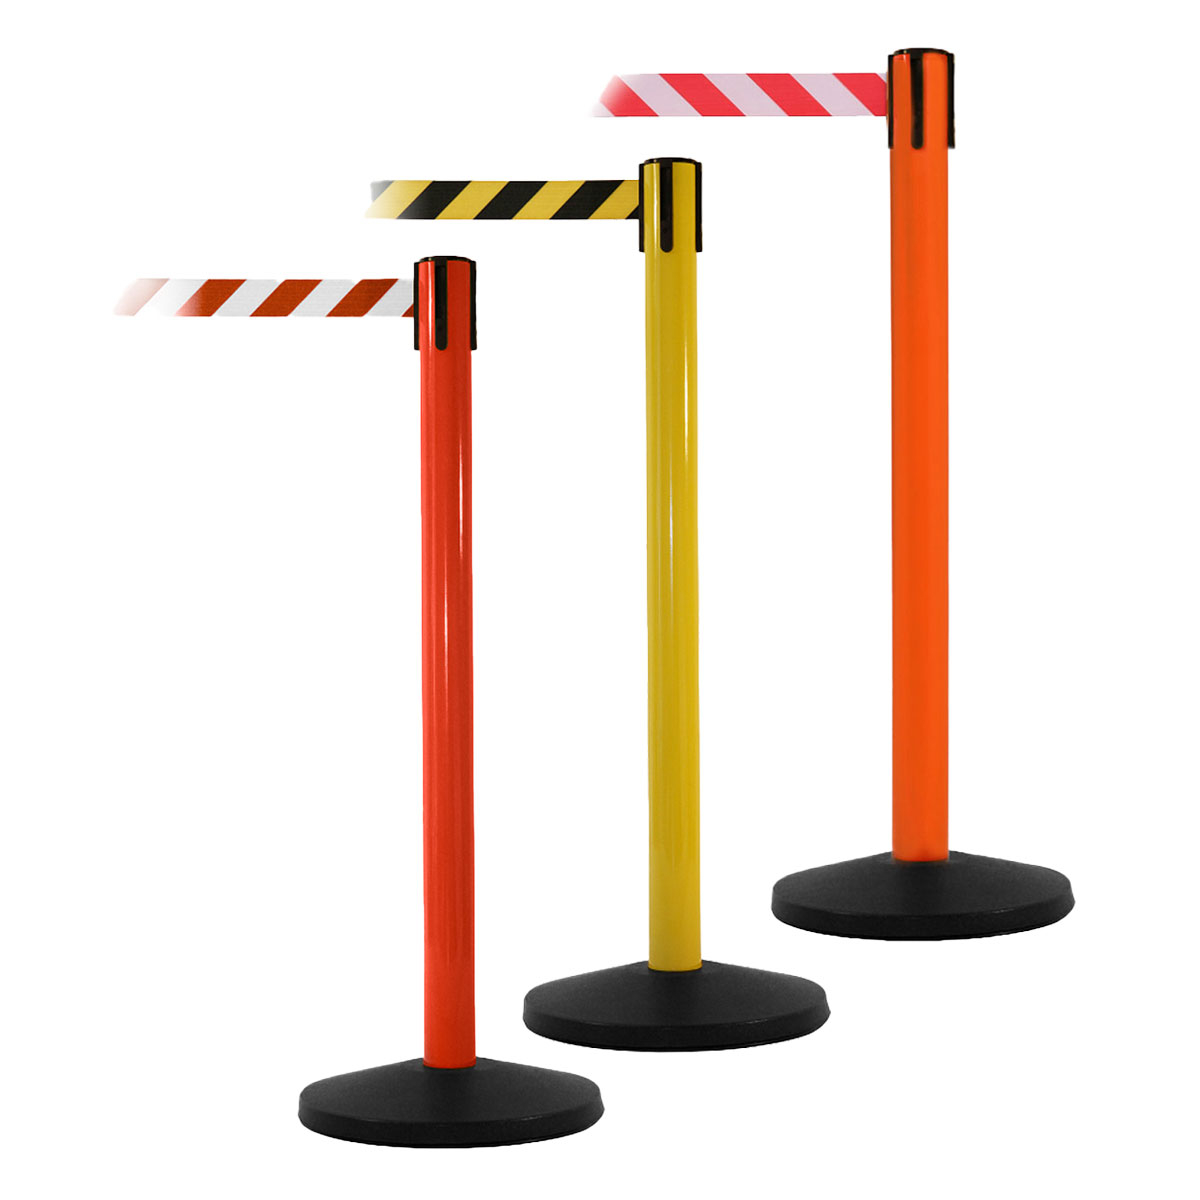 SafetyMaster Retracting Safety Barriers